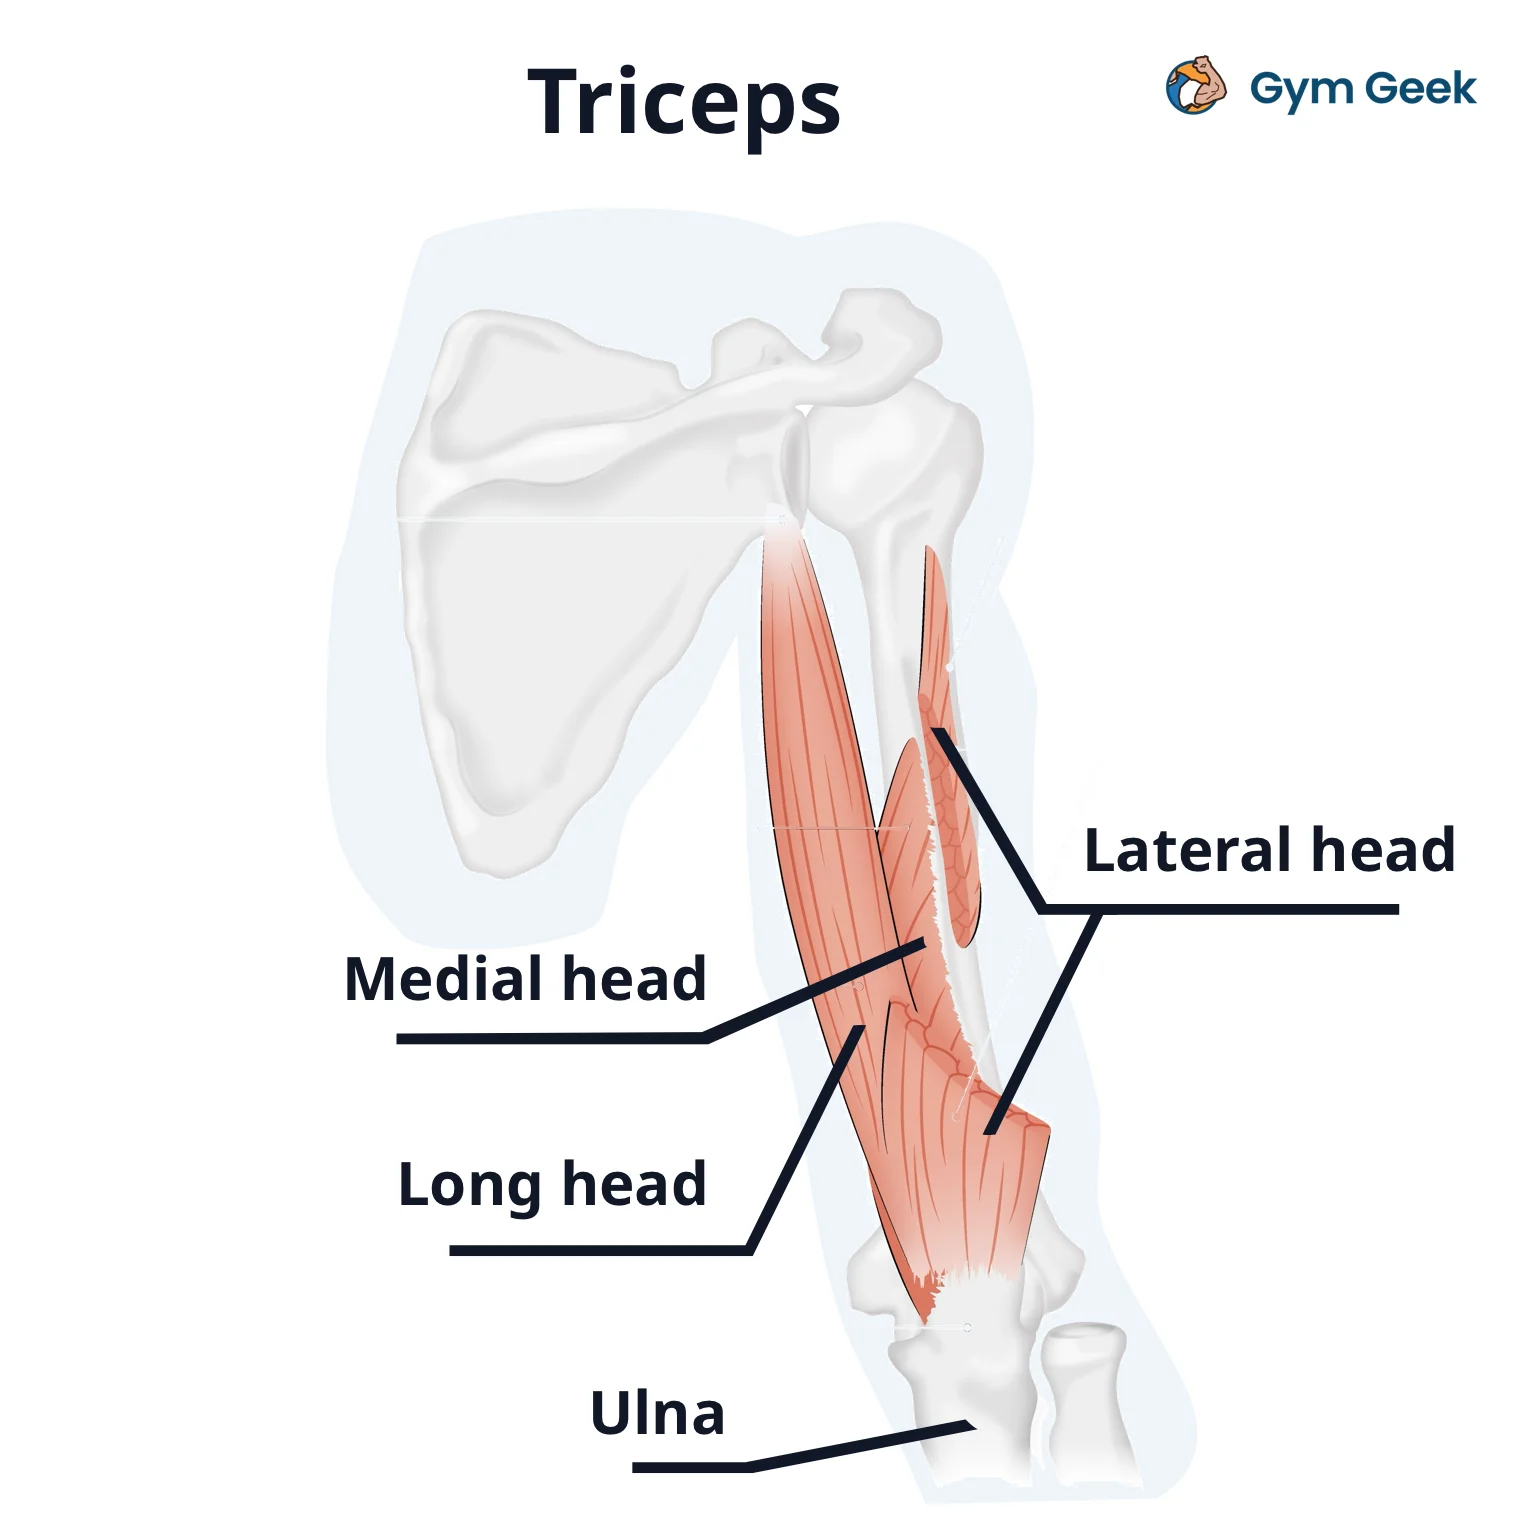 diagram - Triceps muscle diagram showing lateral head, medial head, long head and ulna.